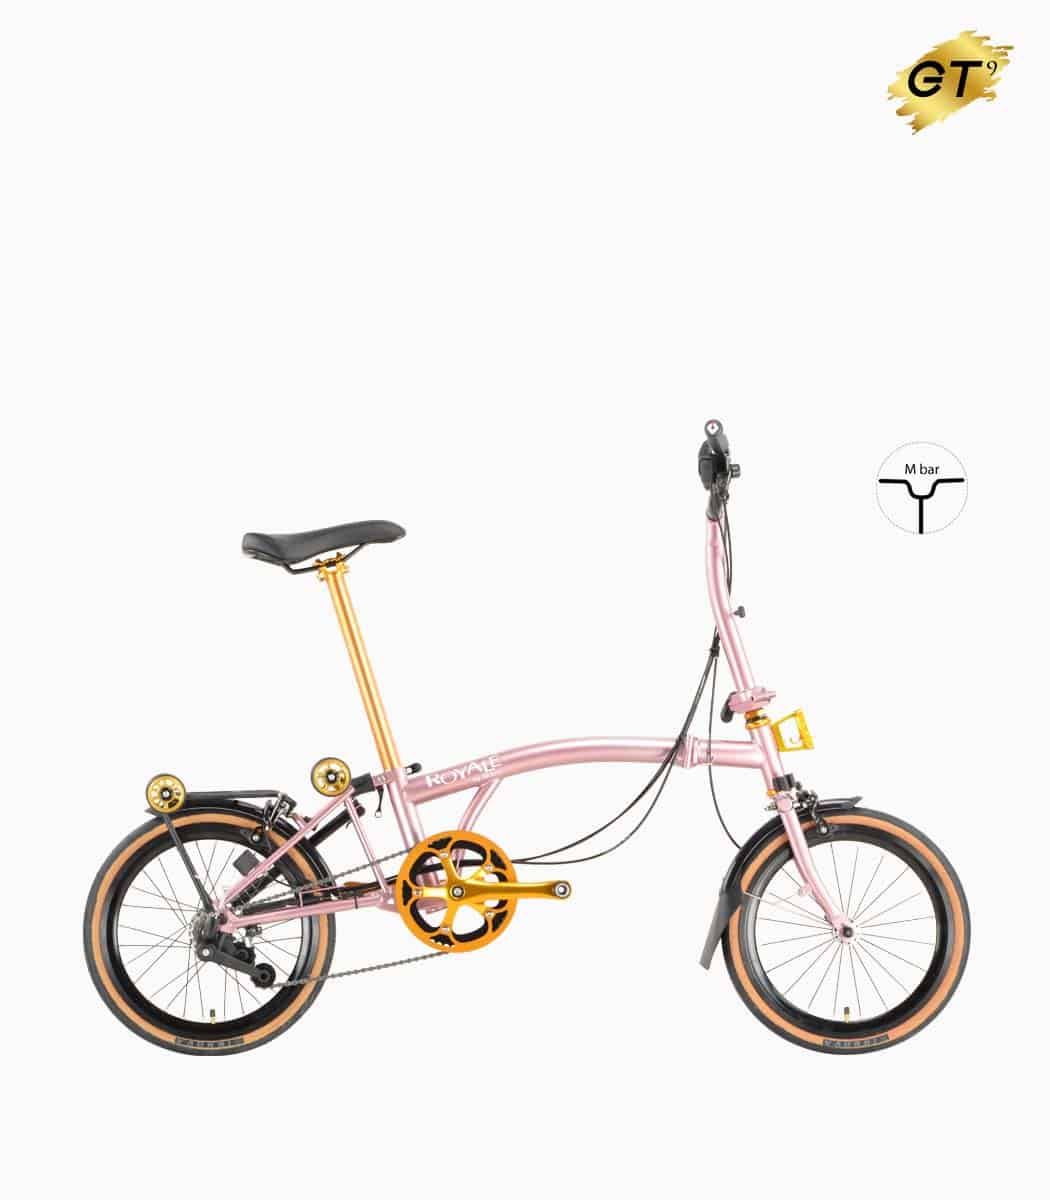 MOBOT ROYALE GT M9 (ROSE PINK) foldable bicycle gold edition M-bar with tanwall tyres high profile rim right